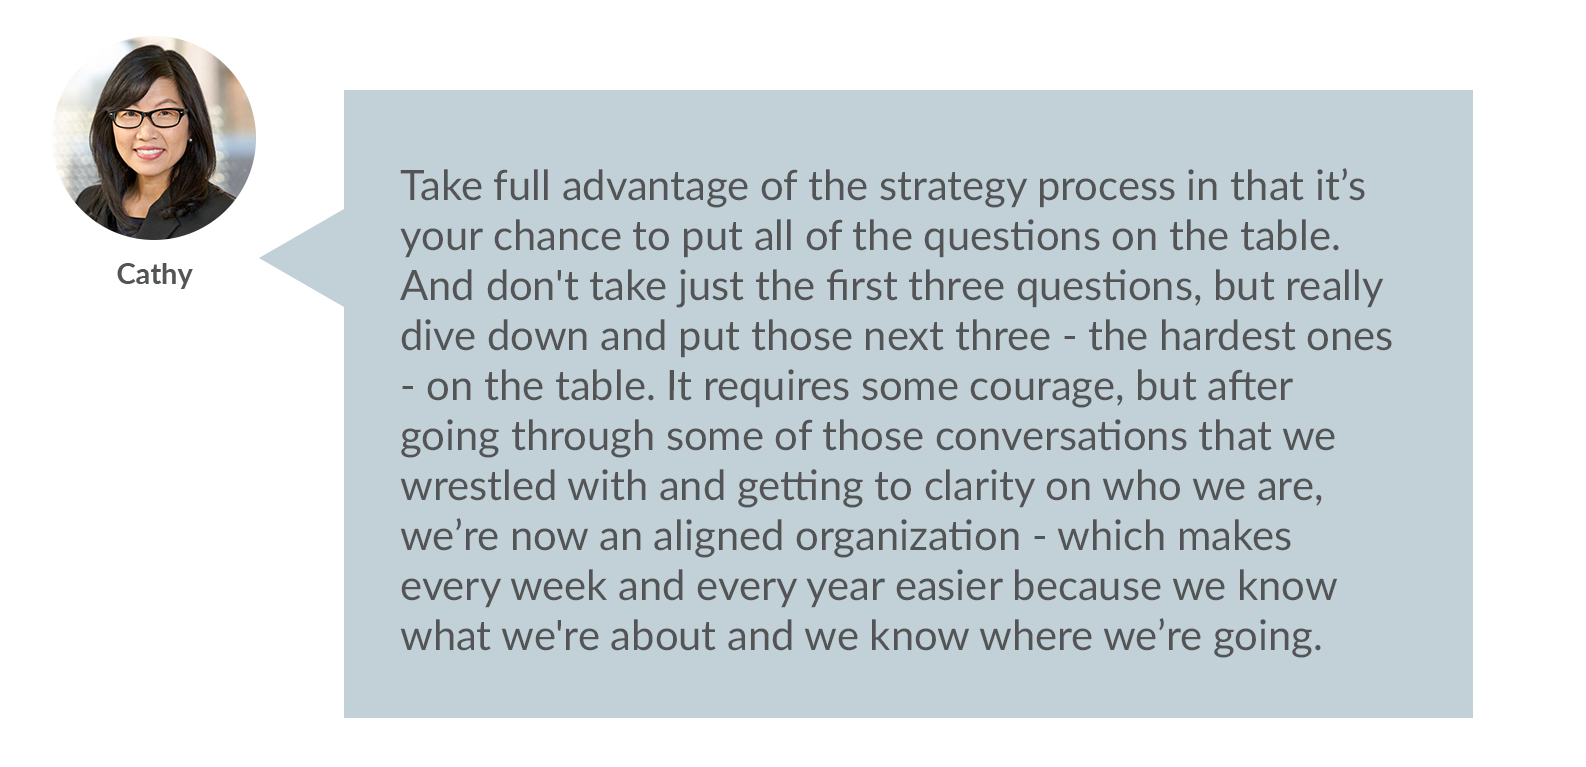 Cathy: Take full advantage of the strategy process in that it’s your chance to put all of the questions on the table. And don't take just the first three questions, but really dive down and put those next three - the hardest ones - on the table. It requires some courage, but after going through some of those conversations that we wrestled with and getting to clarity on who we are, we’re now an aligned organization - which makes every week and every year easier because we know what we're about and we know where we’re going. 